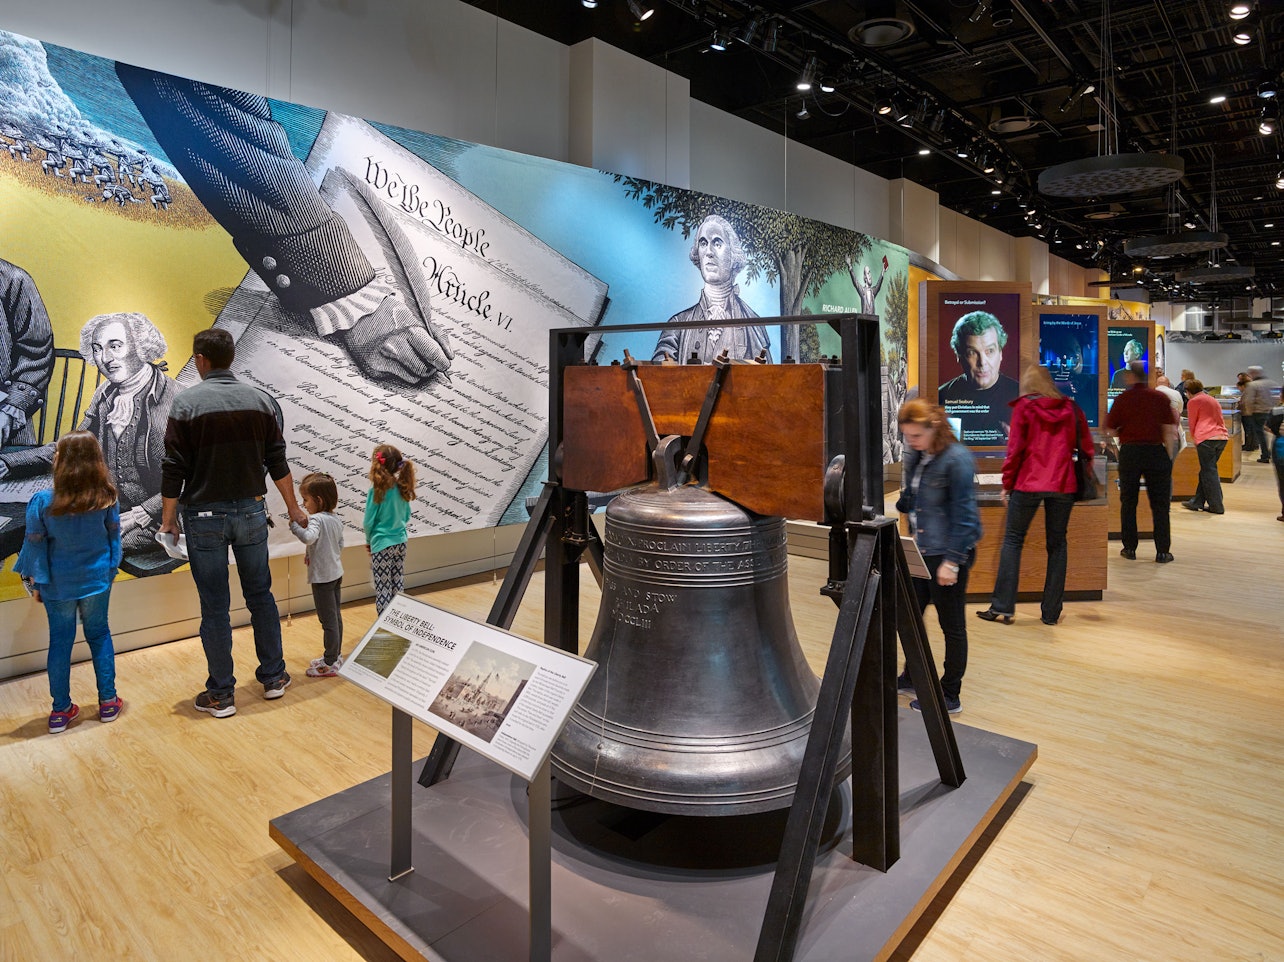 Museum of the Bible: Early Access - Accommodations in Washington D.C.